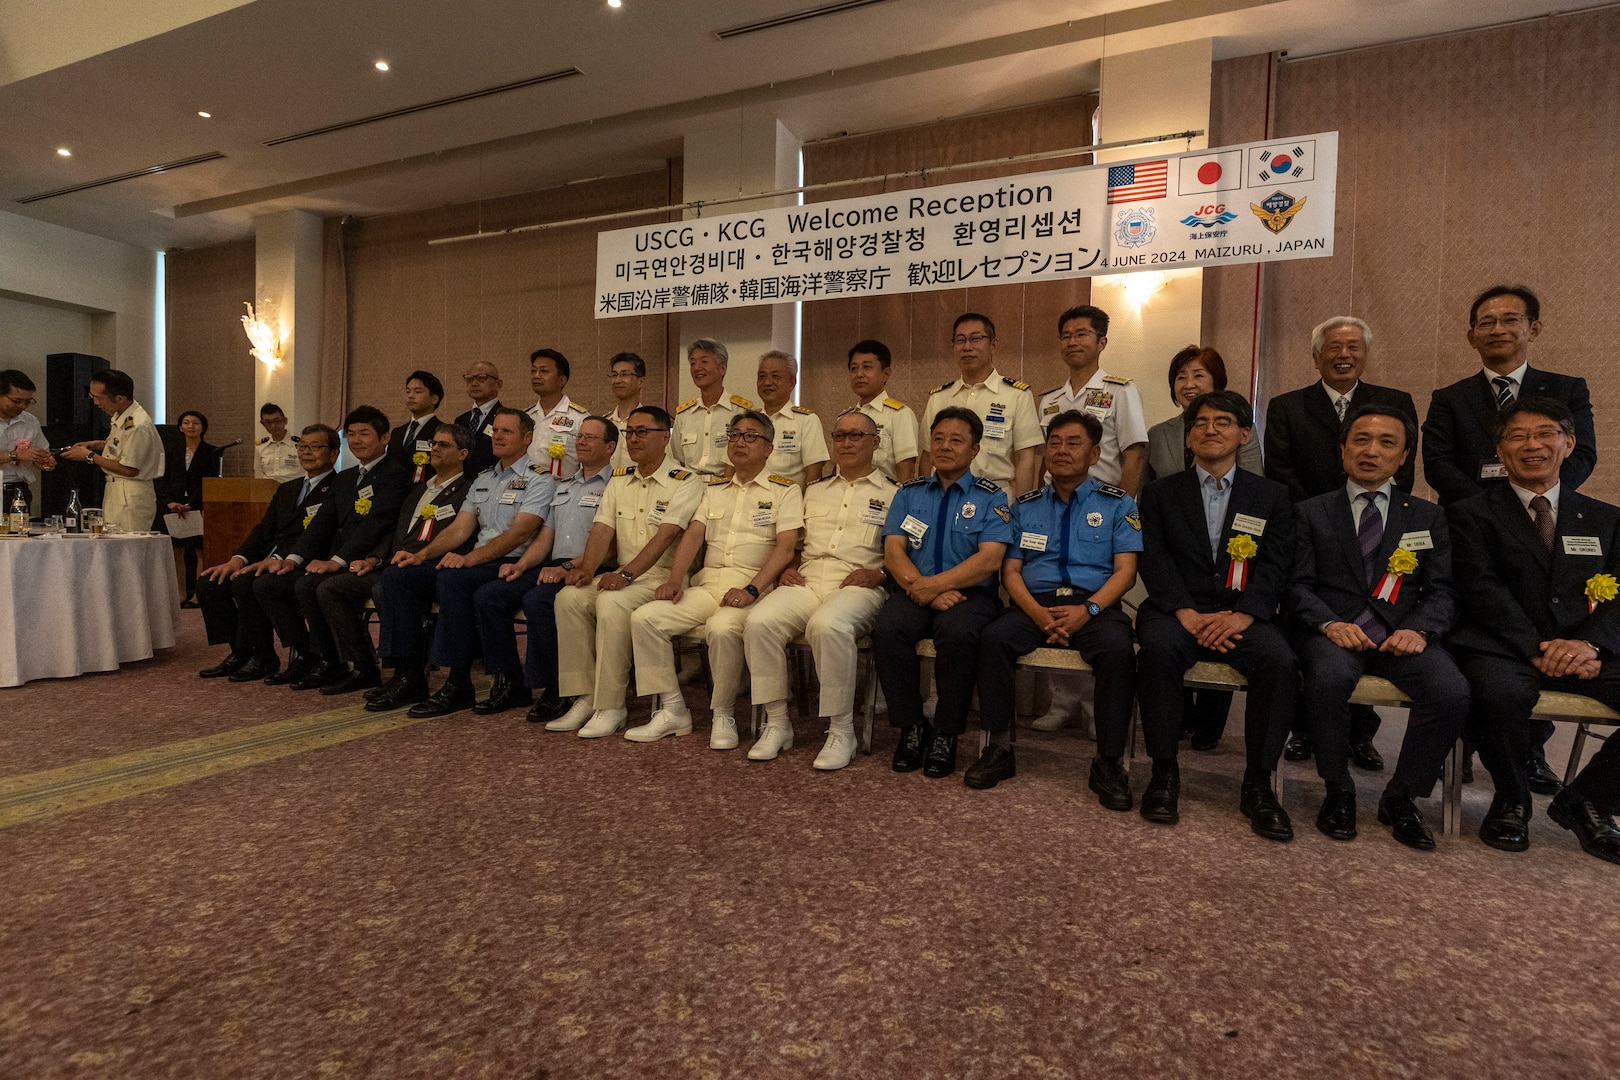 Leadership from the U.S. Coast Guard Cutter Waesche (WMSL-751), Republic of Korea Coast Guard, Japanese Coast Guard, and members from the Maizuru City council pose for a photo during a reception ceremony in Maizuru, Japan, June 5, 2024. The reception was held to commemorate the first trilateral training between the United States, Japanese and Republic of Korea Coast Guards. The U.S. Coast Guard has operated in the Indo-Pacific for more than 150 years, and the service is increasing efforts through targeted patrols with our National Security Cutters, Fast Response Cutters and other activities in support of Coast Guard missions to enhance our partnership. (U.S. Marine Corps photo by Cpl. Elijah Murphy)